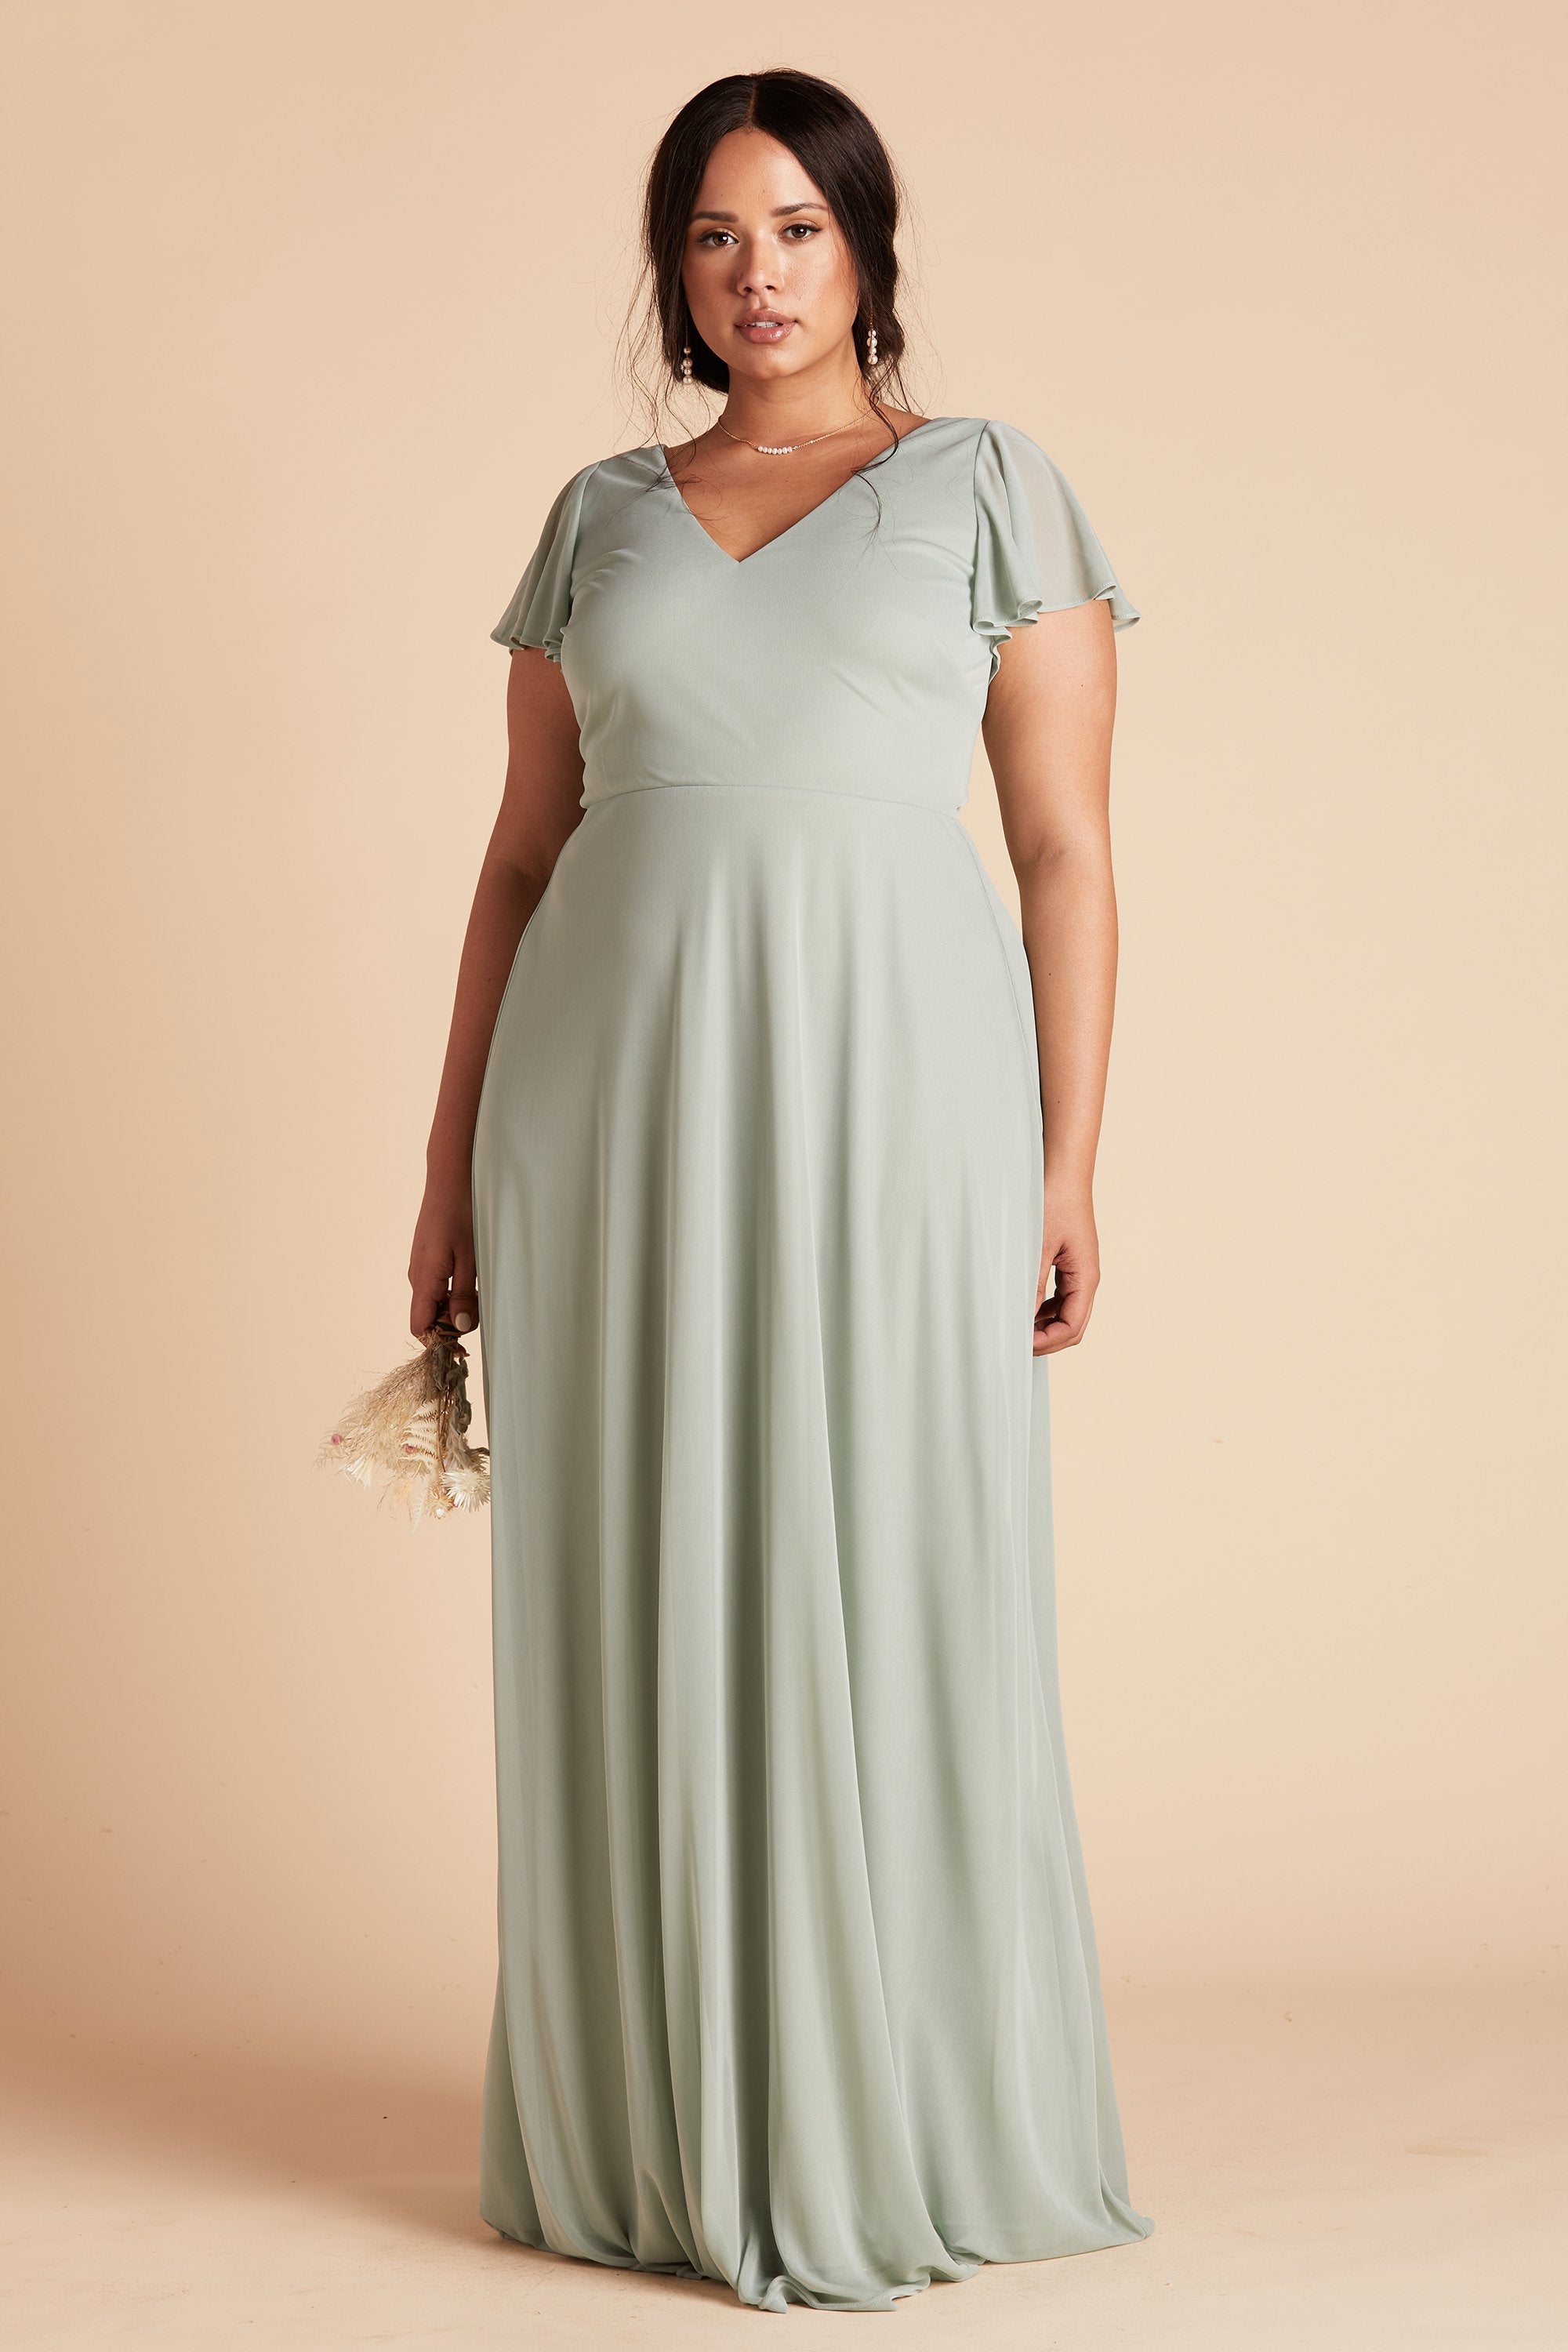 Hannah plus size bridesmaids dress in sage green mesh by Birdy Grey, front view